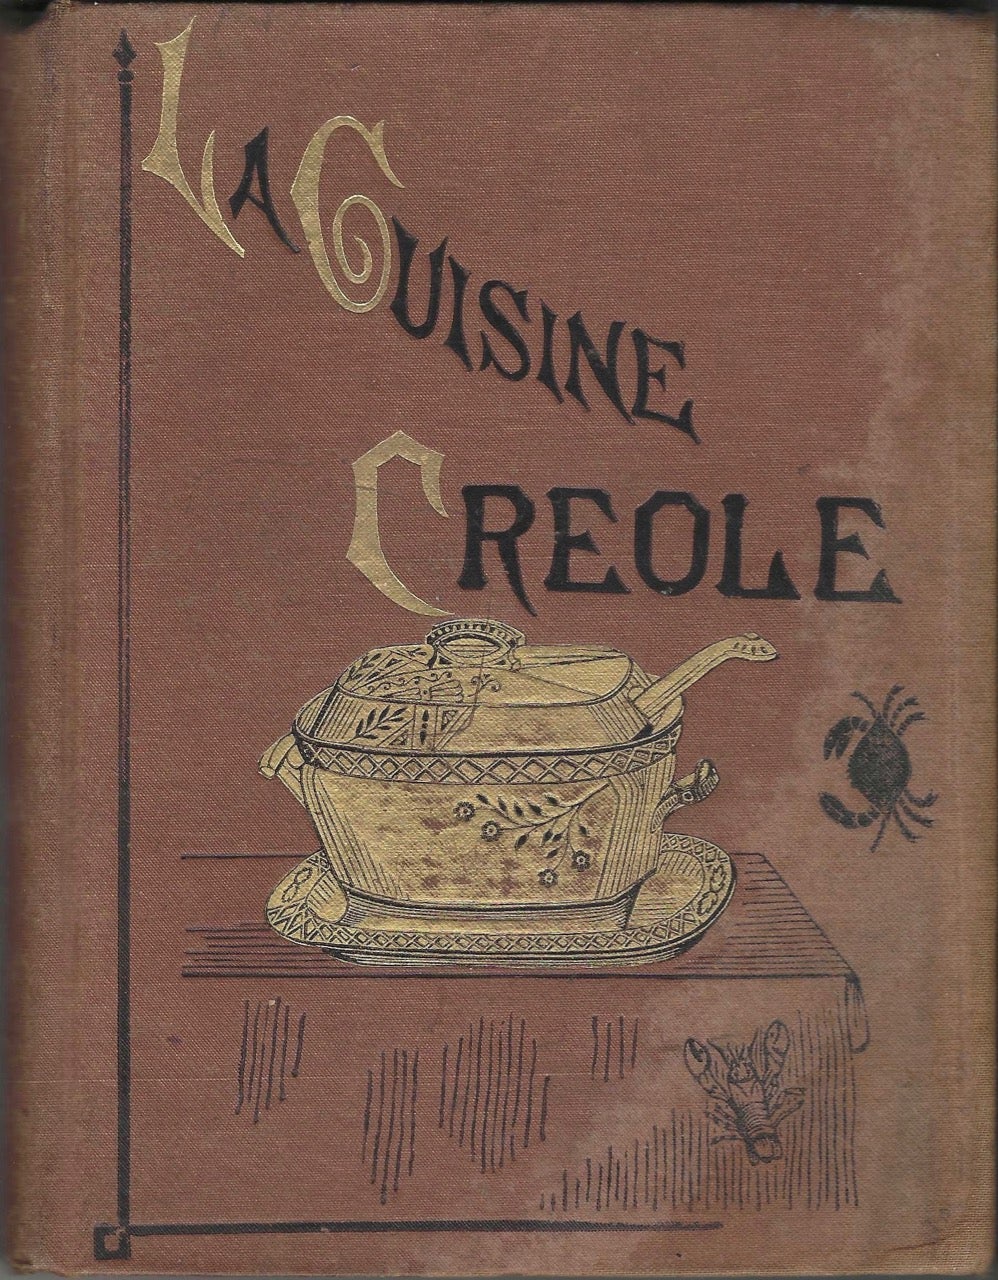 Item #8664 La Cuisine Creole: A Collection of Culinary Recipes, From Leading Chefs and Noted Creole Housewives, Who Have Made New Orleans Famous for its Cuisine. Lafcadio Hearn.